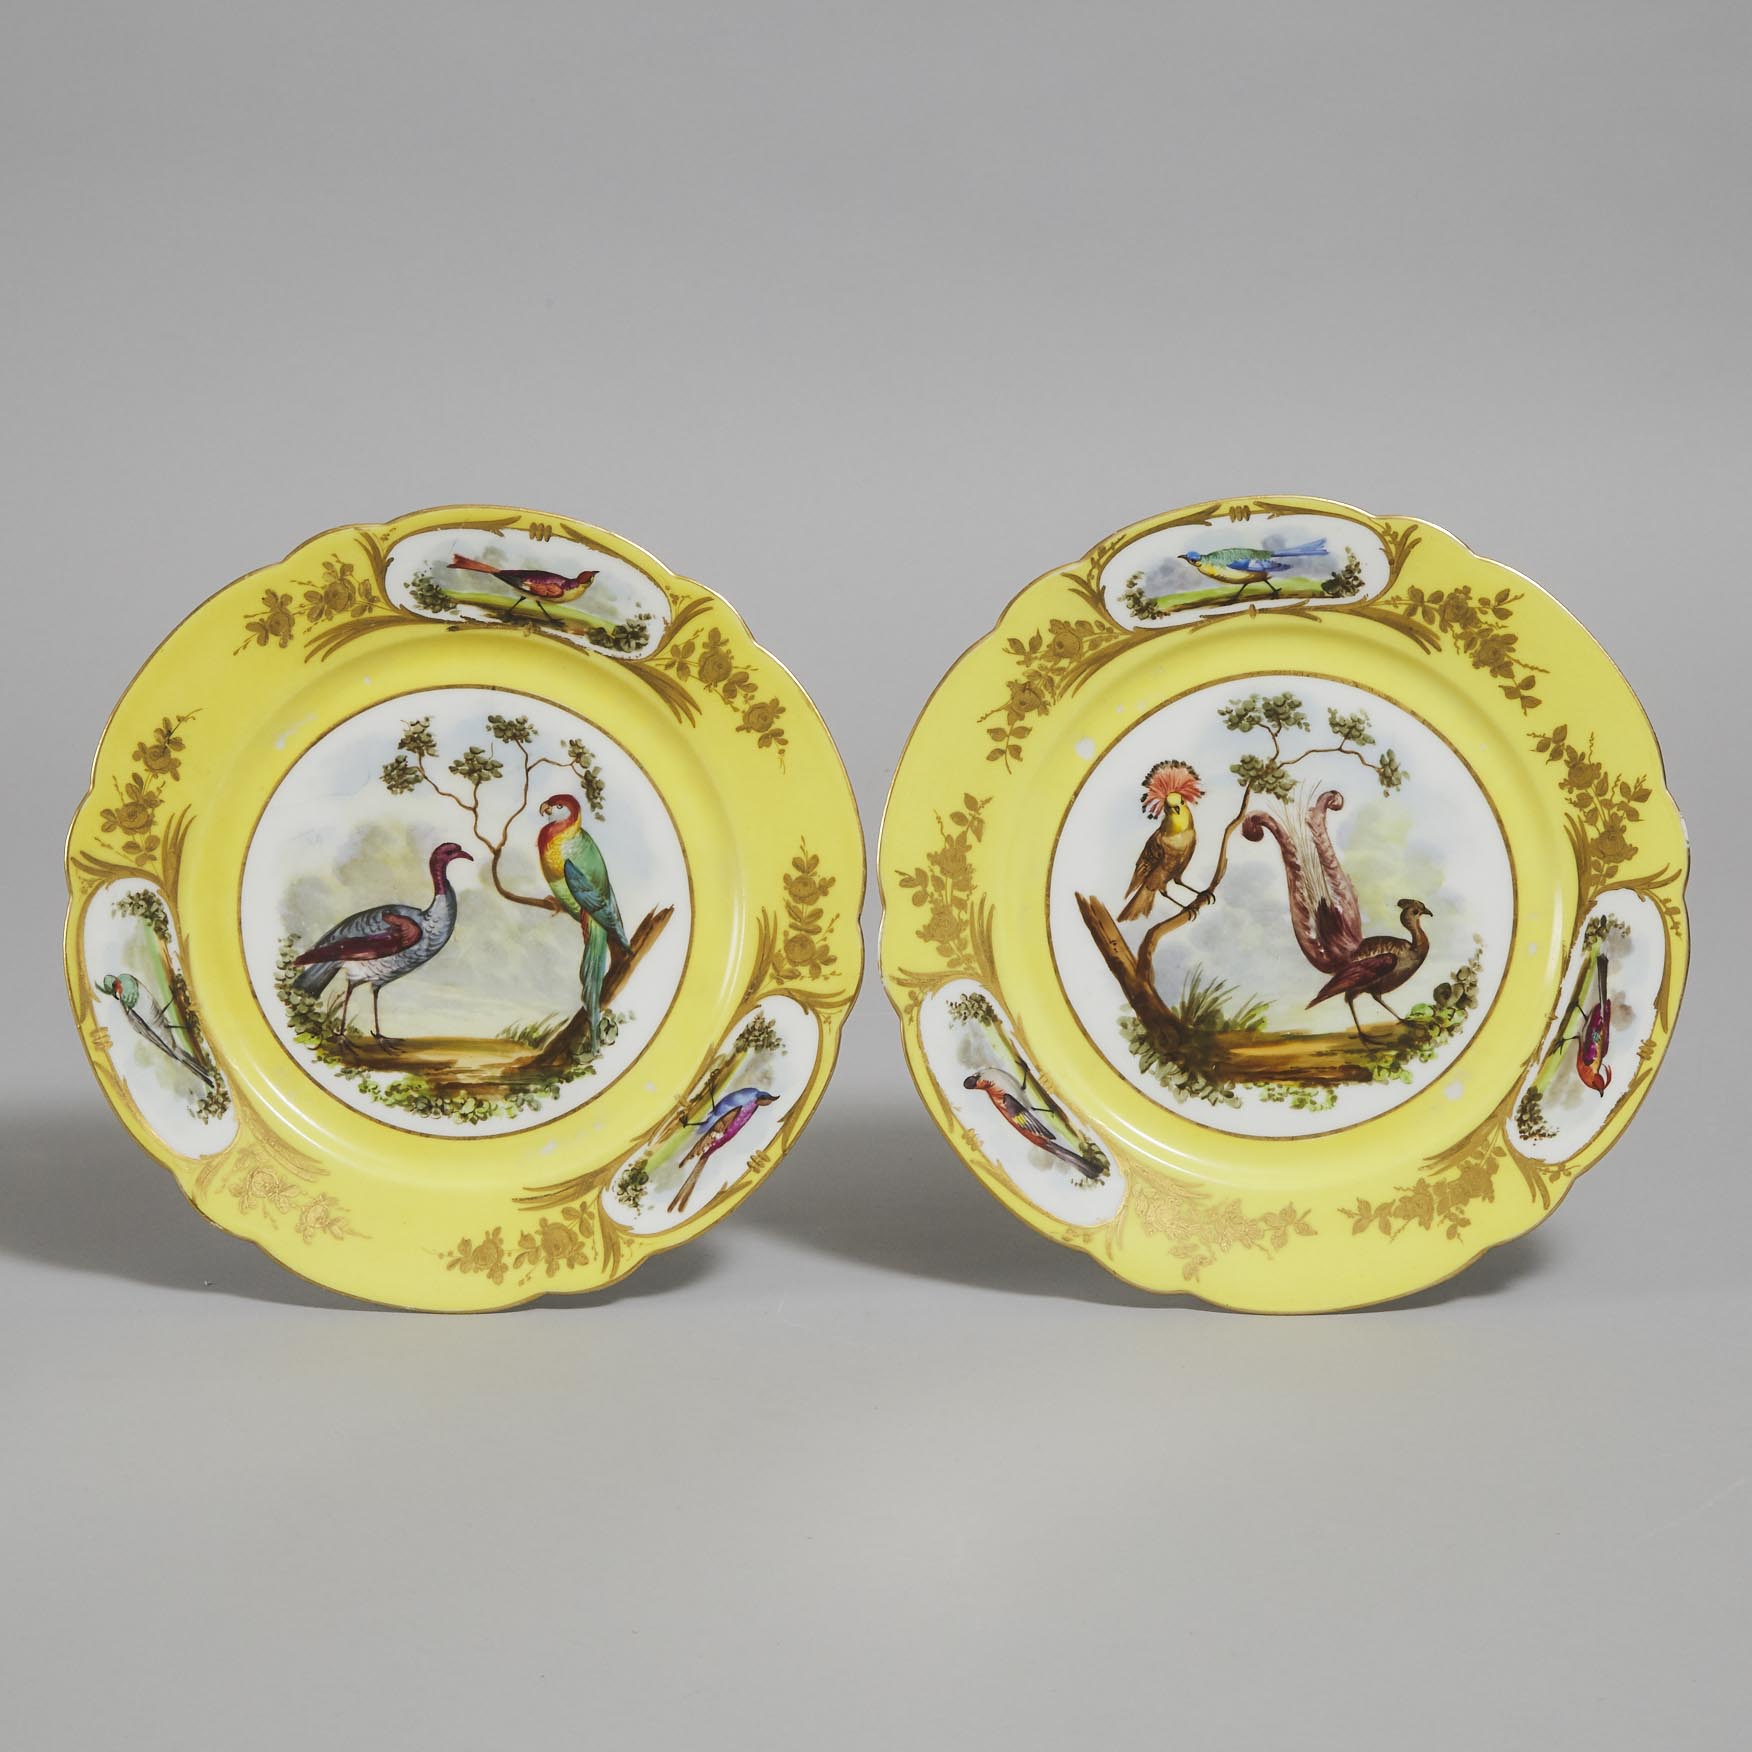 Pair of 'Sèvres' Yellow Ground Ornithological Plates, c.1900